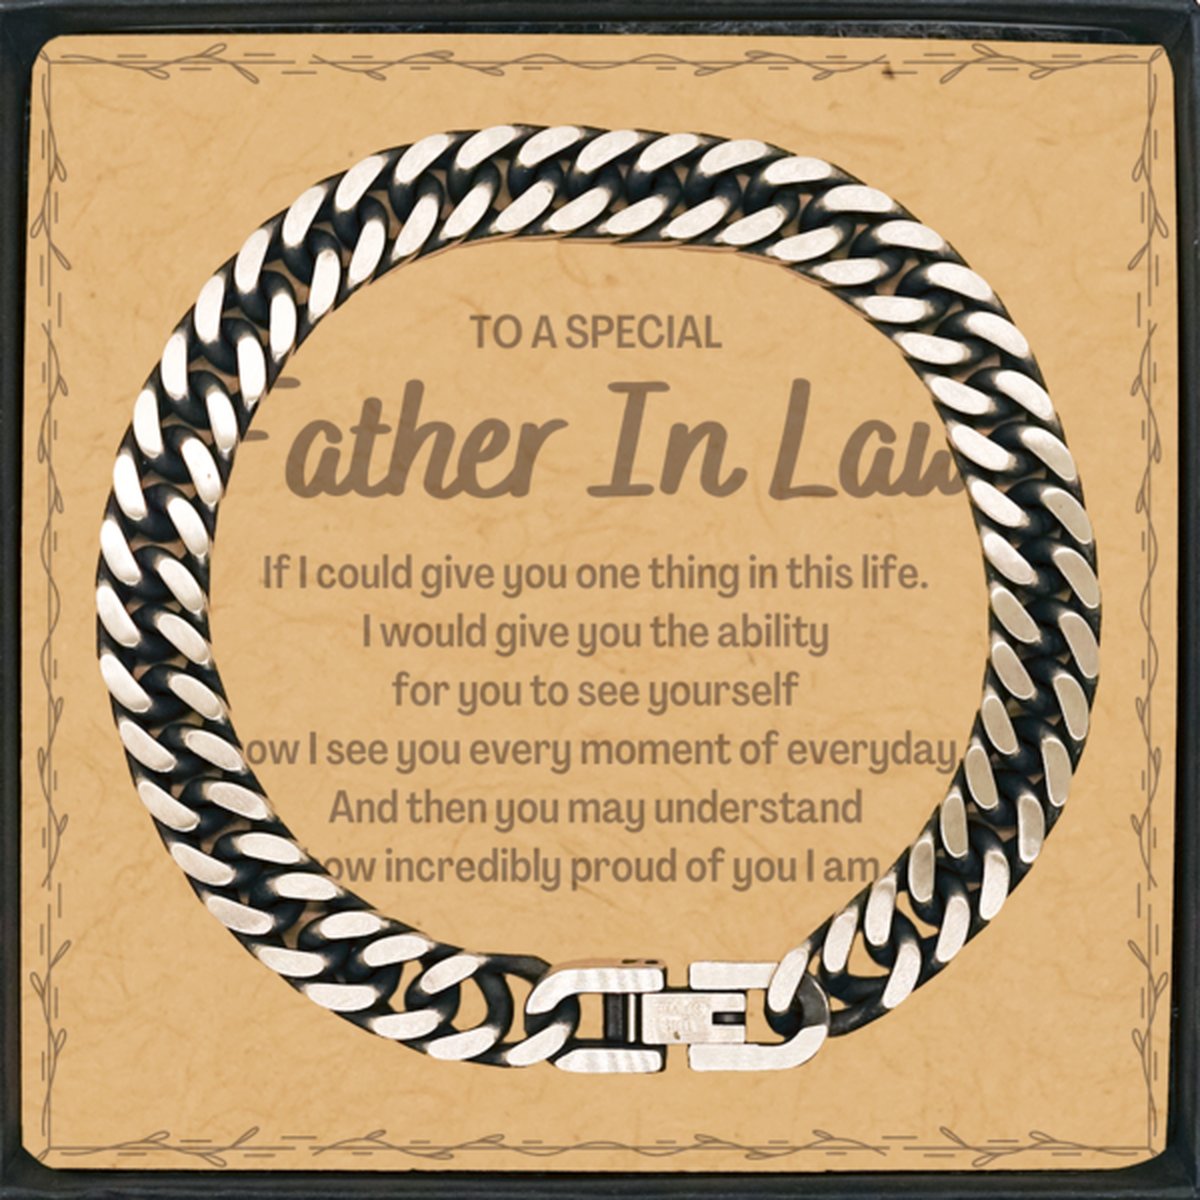 To My Father In Law Cuban Link Chain Bracelet, Gifts For Father In Law Message Card, Inspirational Gifts for Christmas Birthday, Epic Gifts for Father In Law To A Special Father In Law how incredibly proud of you I am